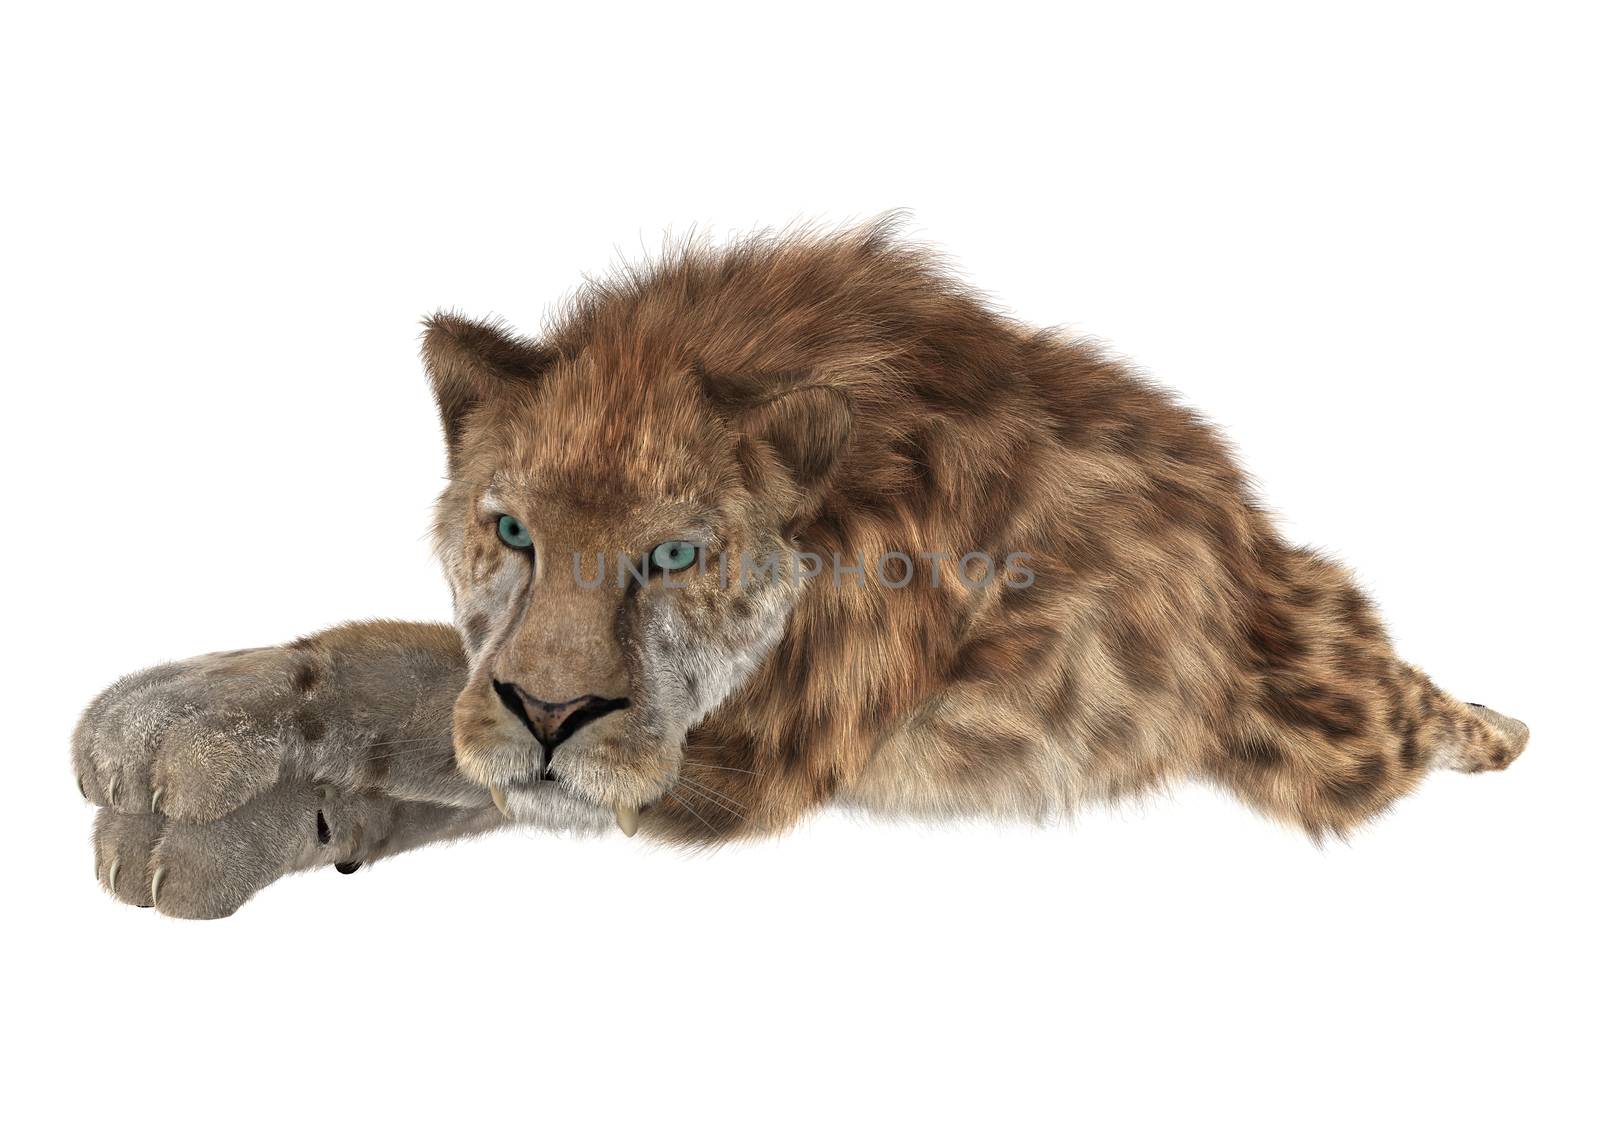 3D digital render of a smilodon or a saber toothed cat isolated on white background